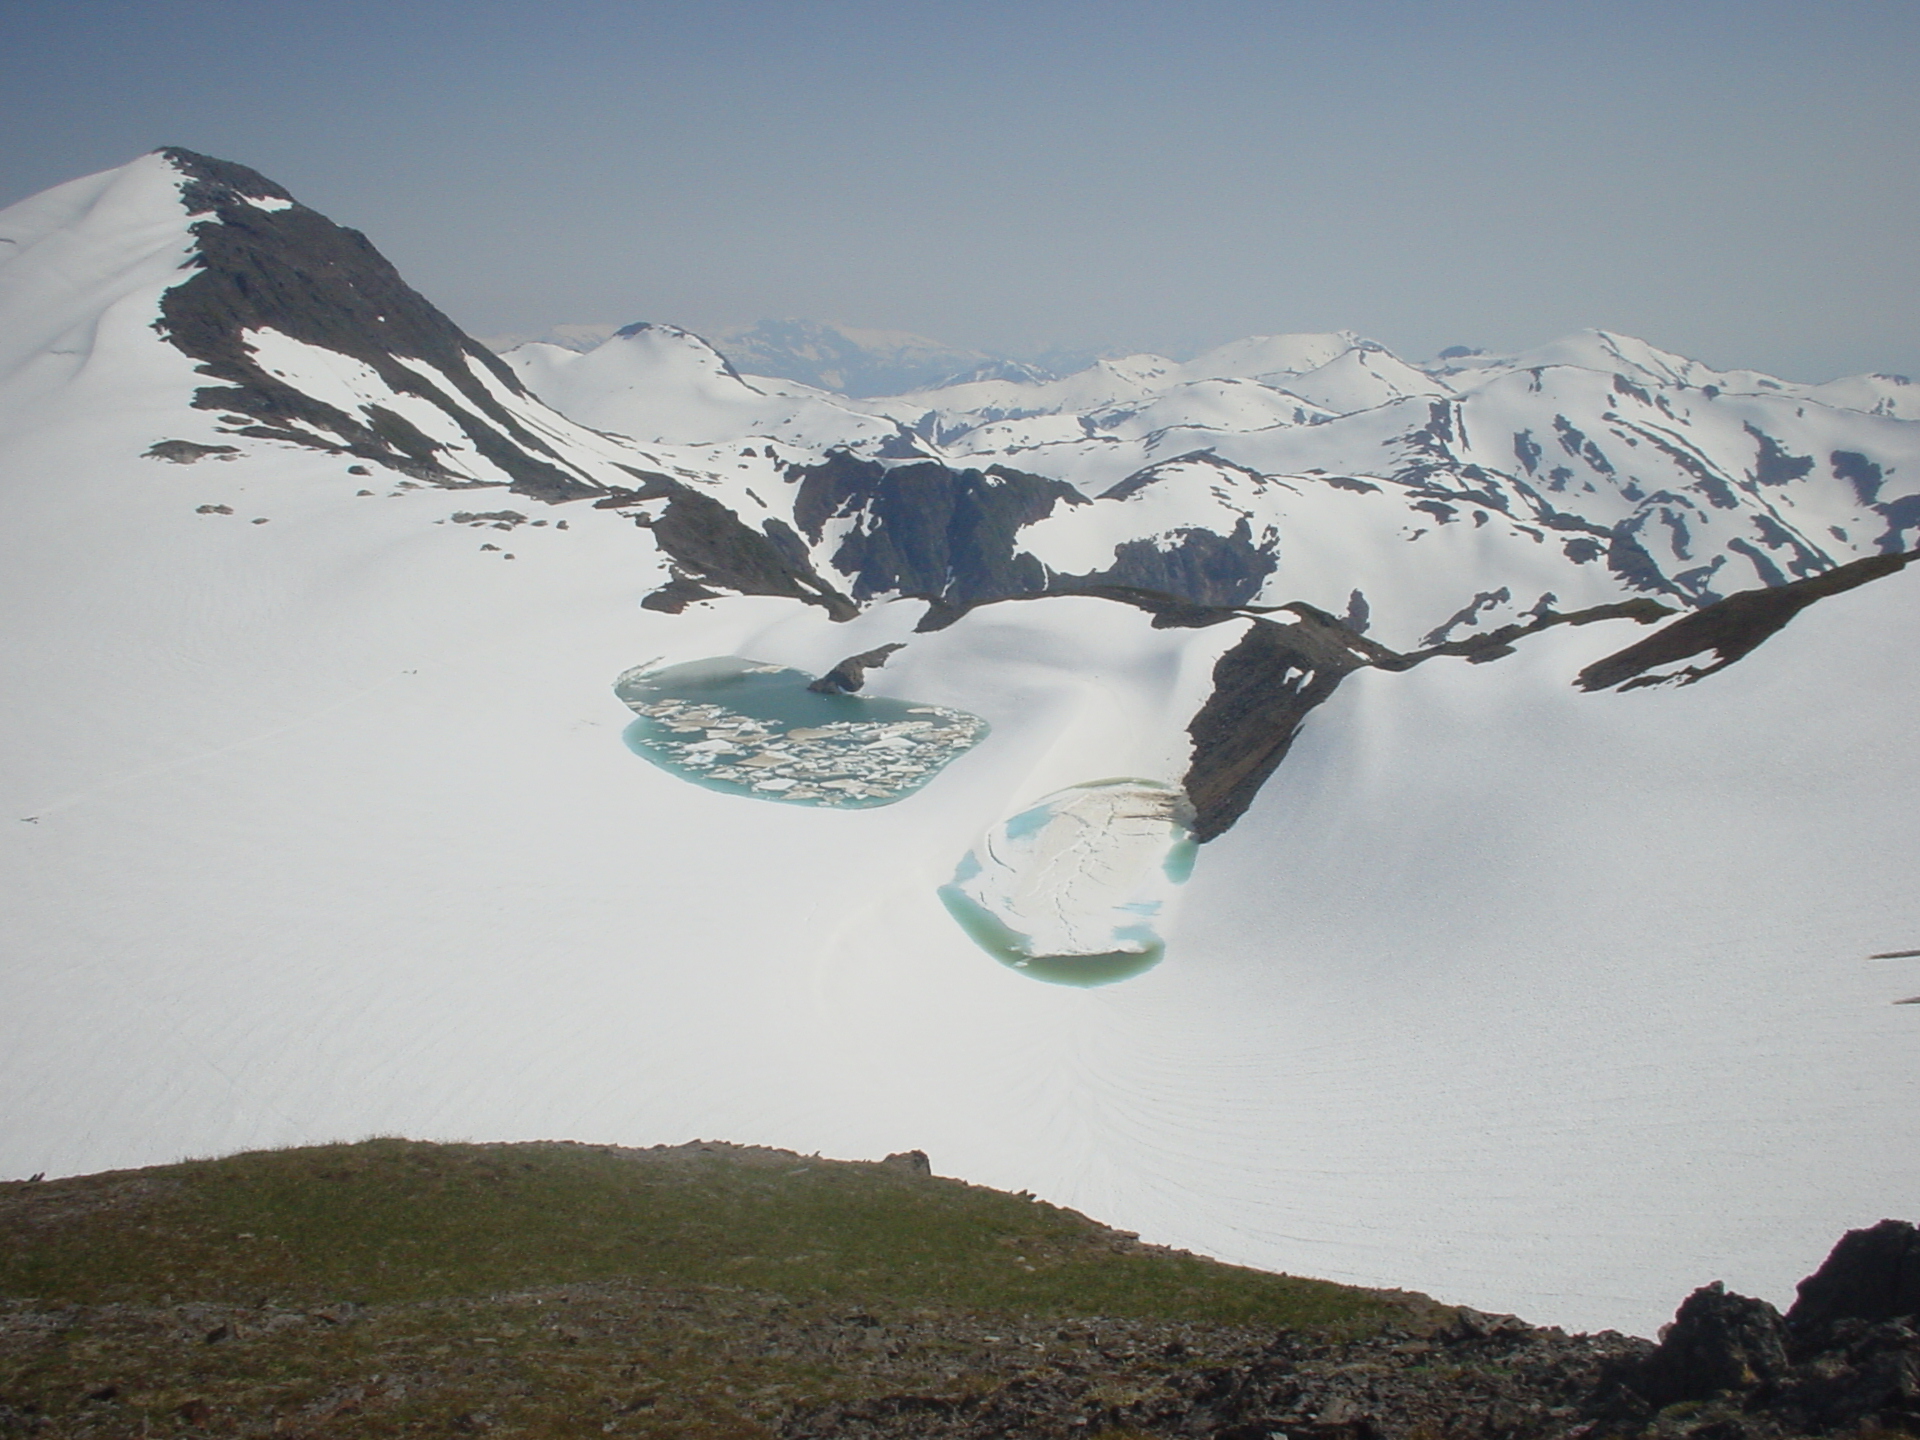 Large ponds of liquid water that form on the top of a glacier, supraglacial lakes can form slowly and drain catastrophically, flooding the watershed below. These two supraglacial lakes formed on Lemon Creek Glacier in 2009. (Credit: Matt Heavner)